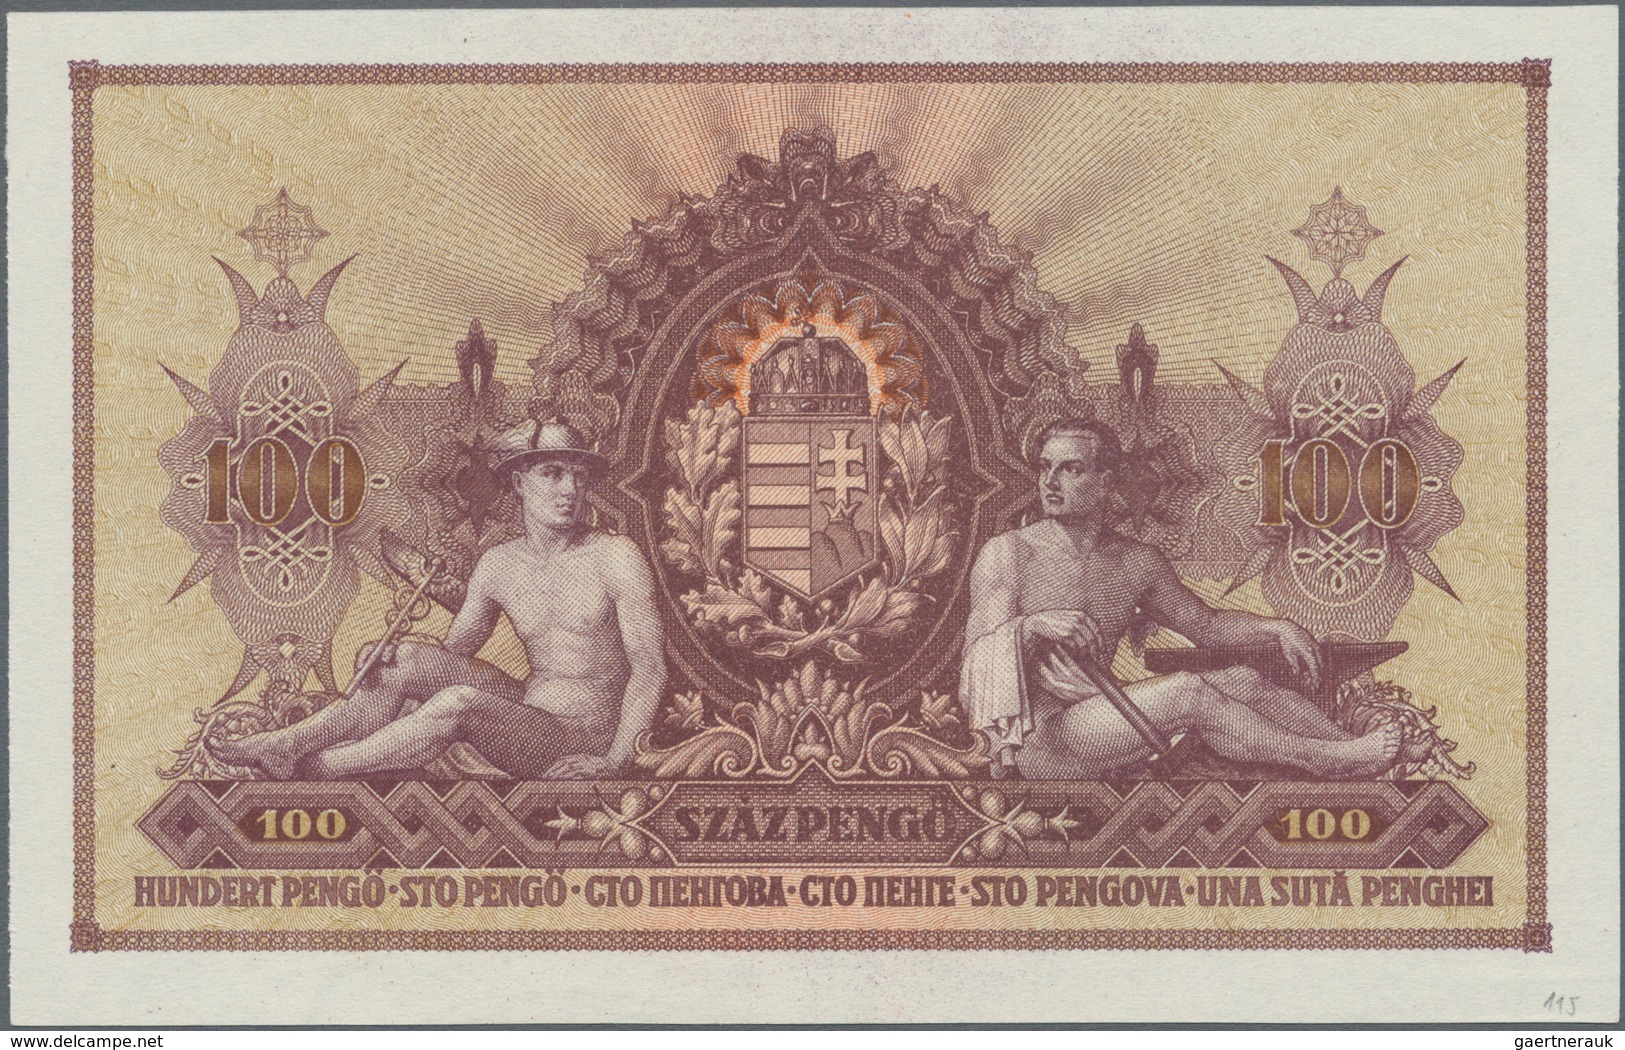 Hungary / Ungarn: 100 Pengö 1943, P.115 Issued By The Government Of Szálasi Ferenc In Veszprém In Pe - Ungarn